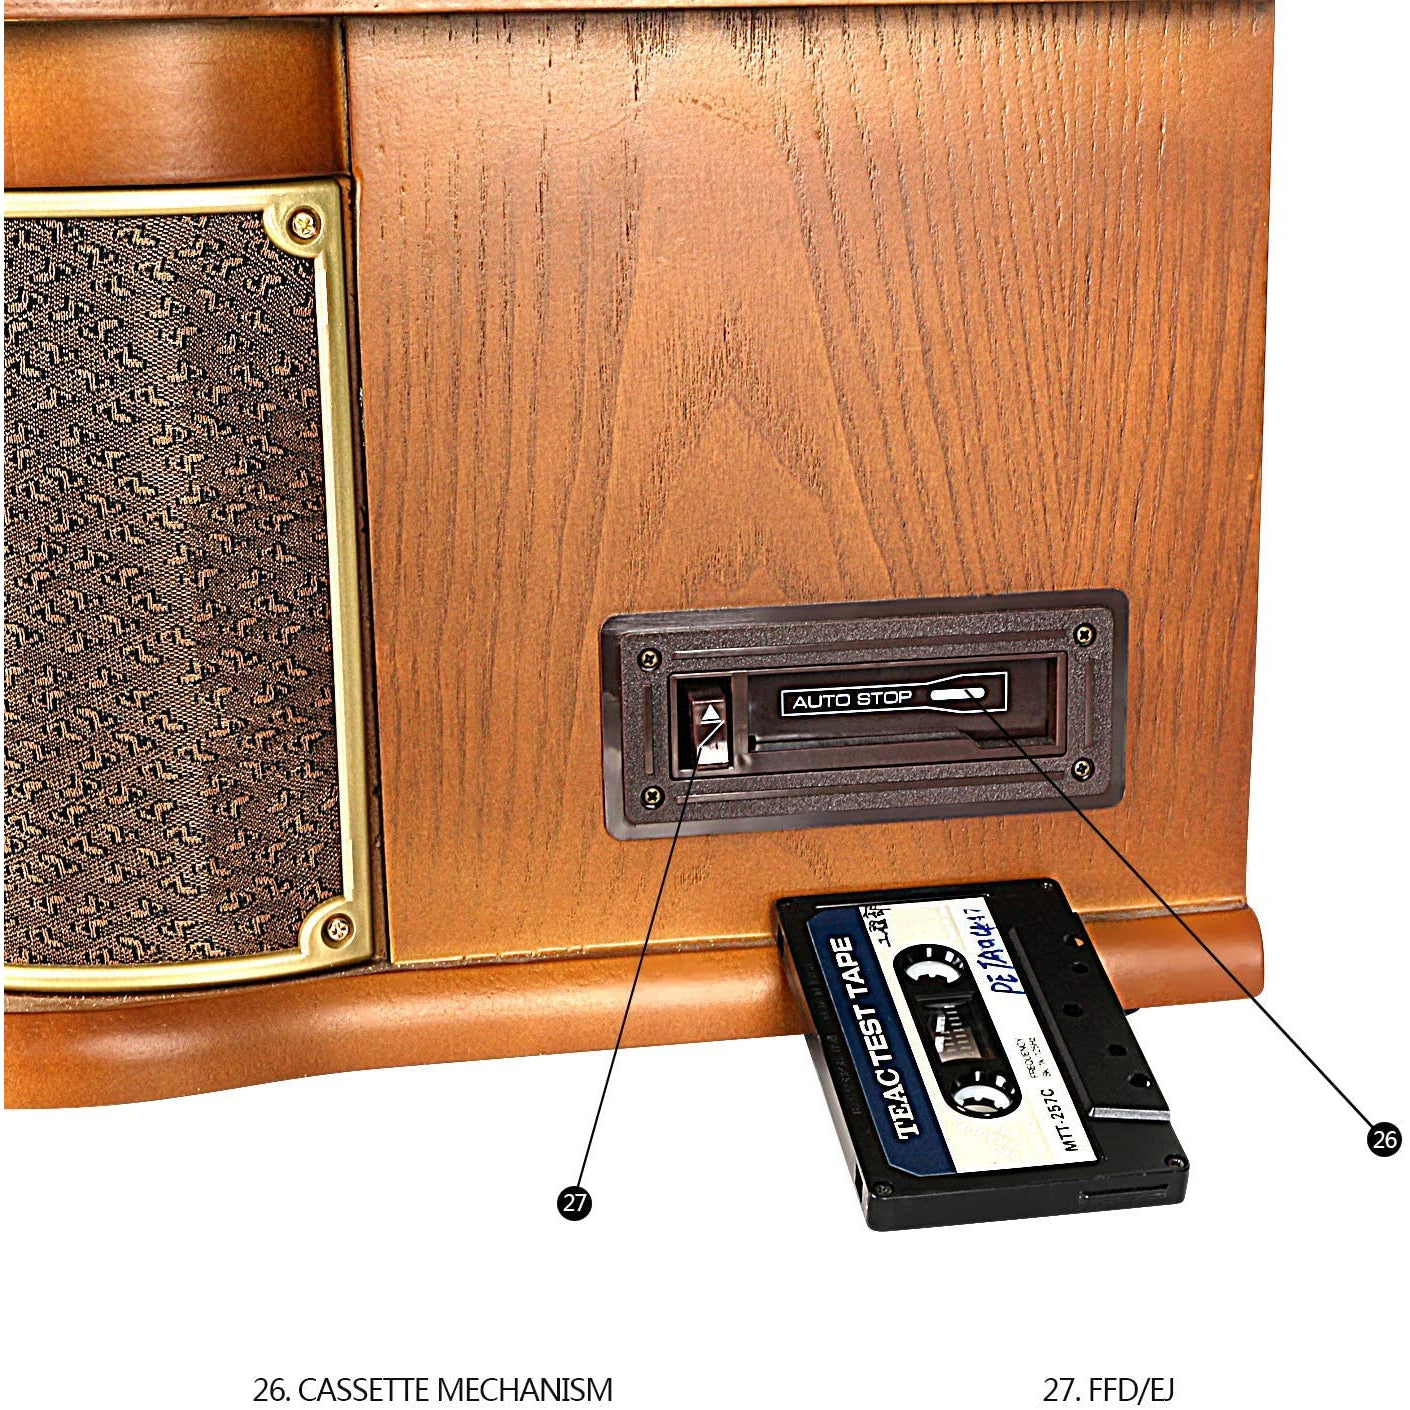 Record Player DLITIME, with DAB+ & FM/USB/RCA/AUX/Remote Control/CD/Bluetooth/Cassette Vinyl Player VintageTurntable - Wood